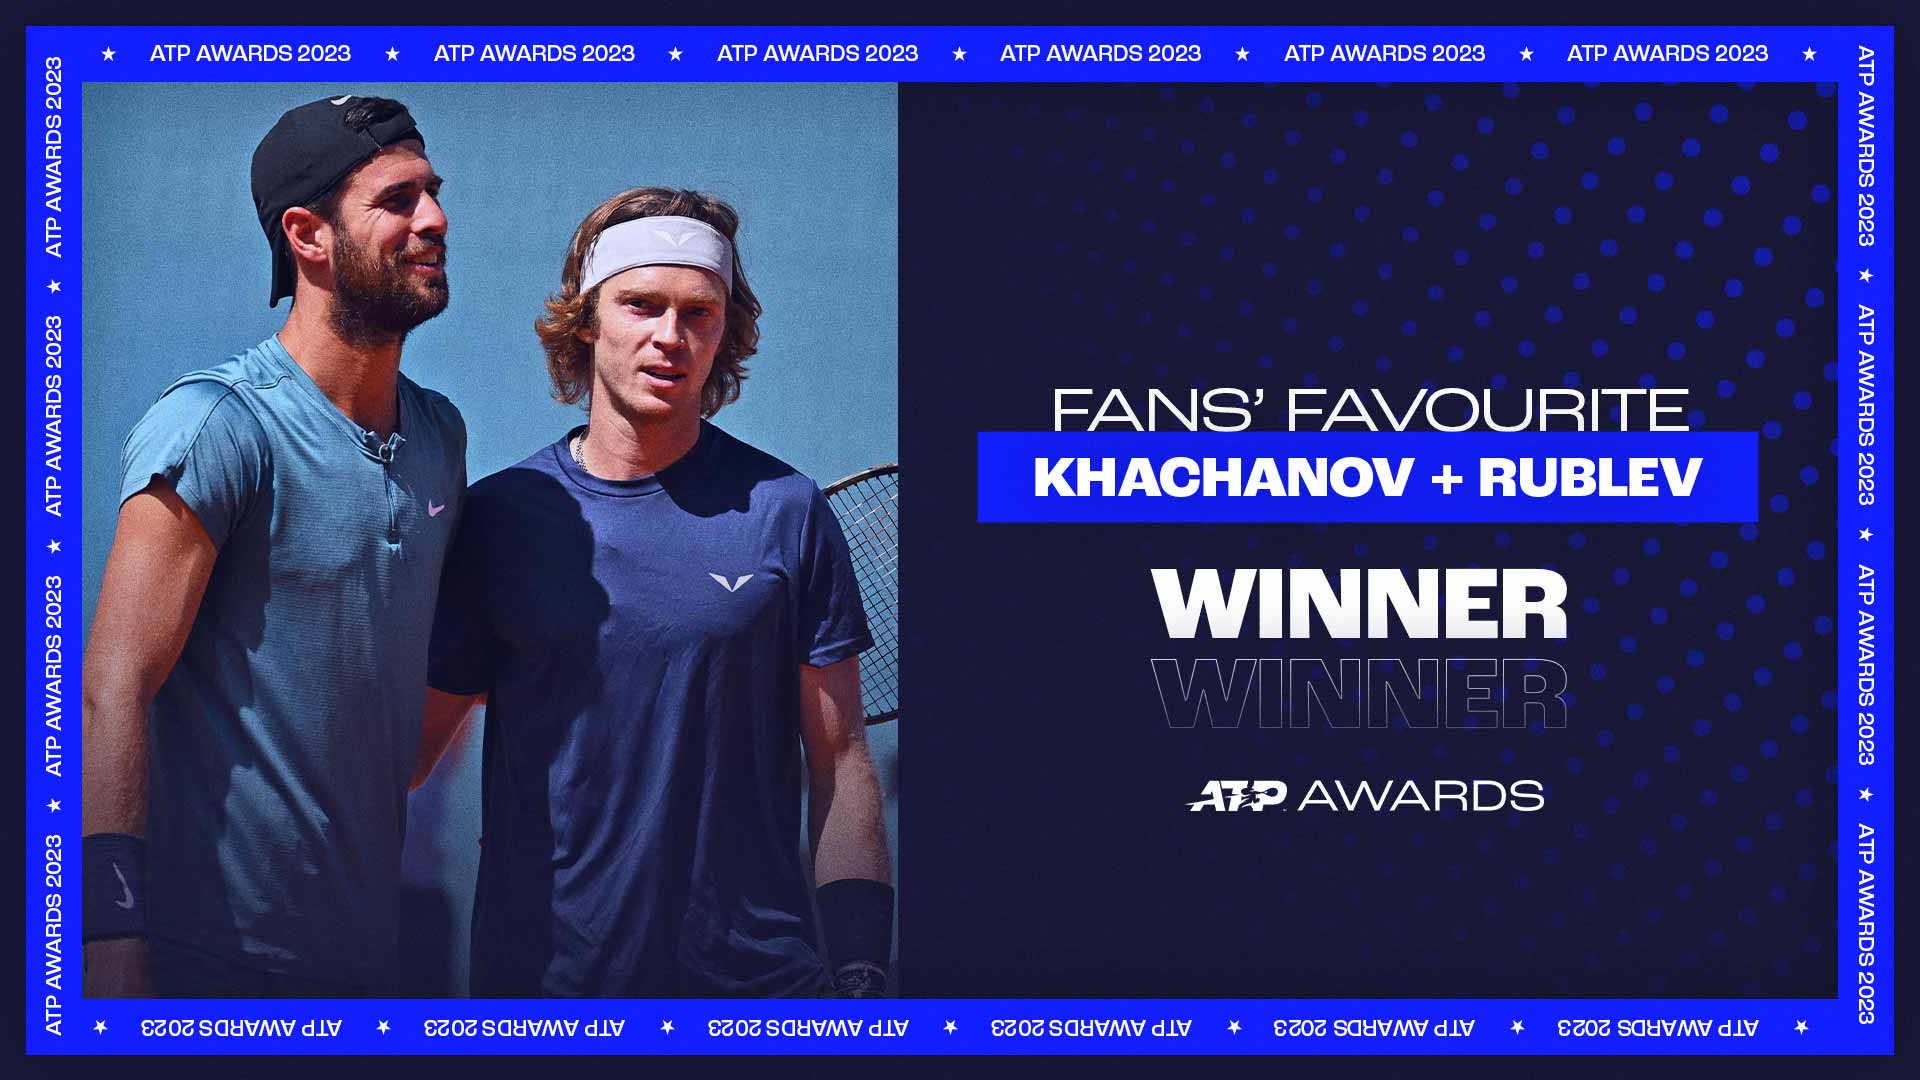 Khachanov & Rublev Named Fans' Favourite Doubles Duo In 2023 ATP Awards